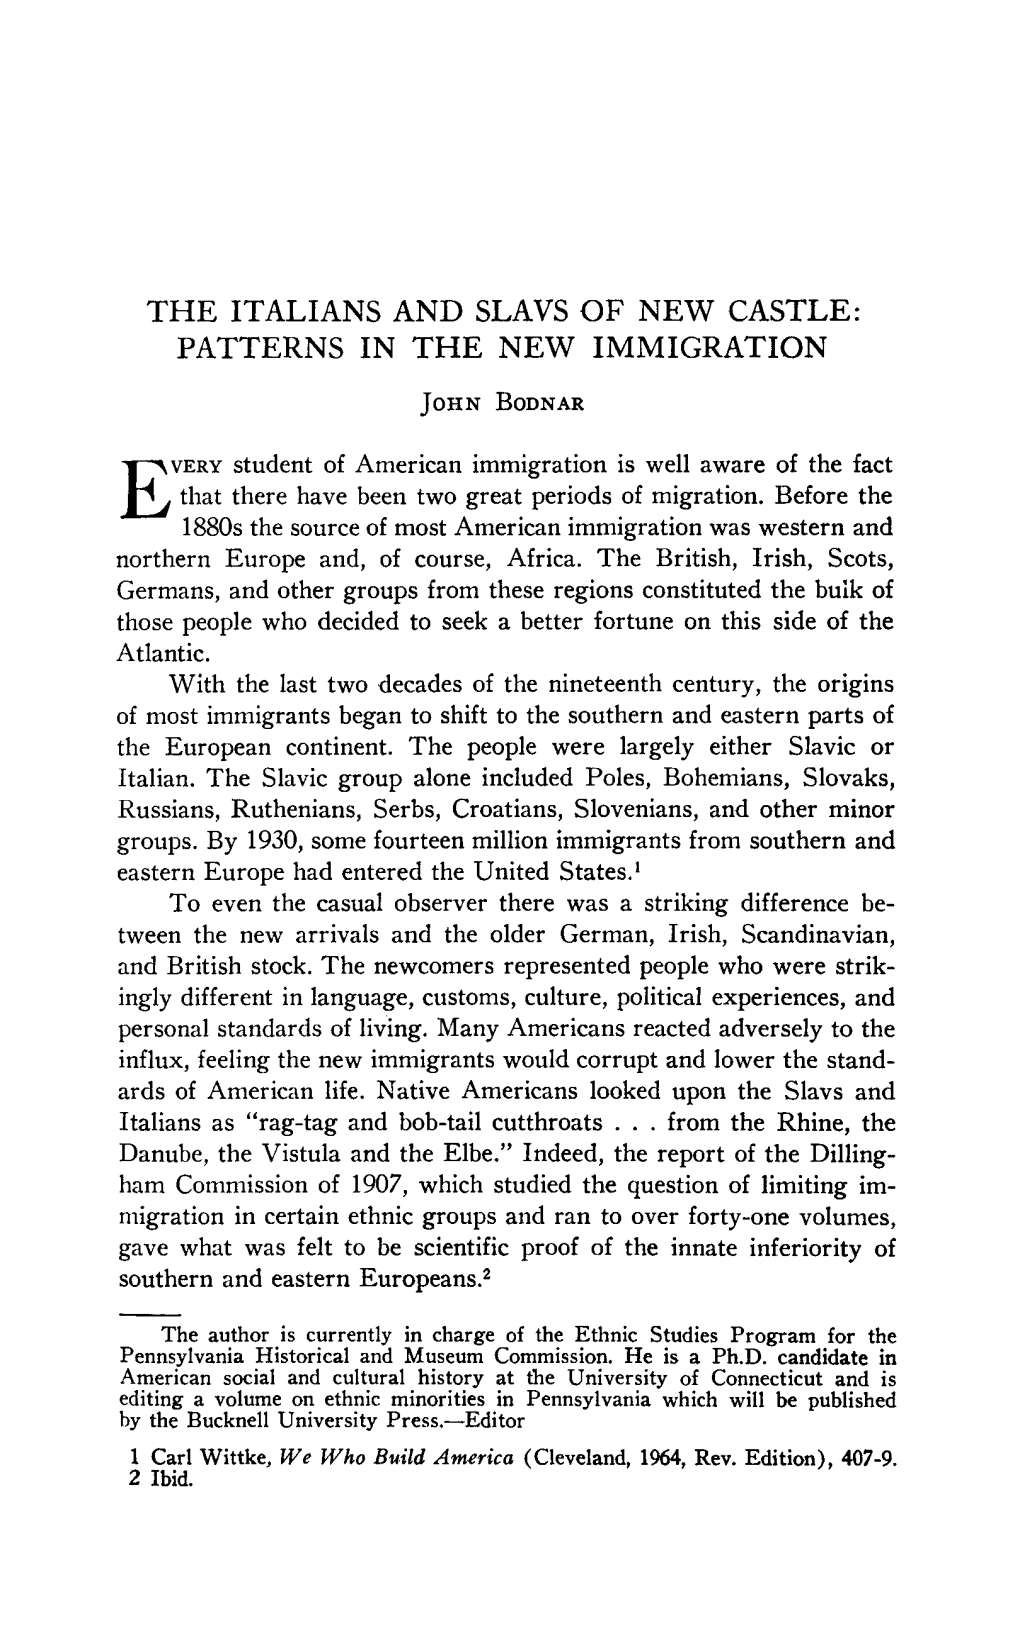 PATTERNS in the NEW IMMIGRATION John Bodnar